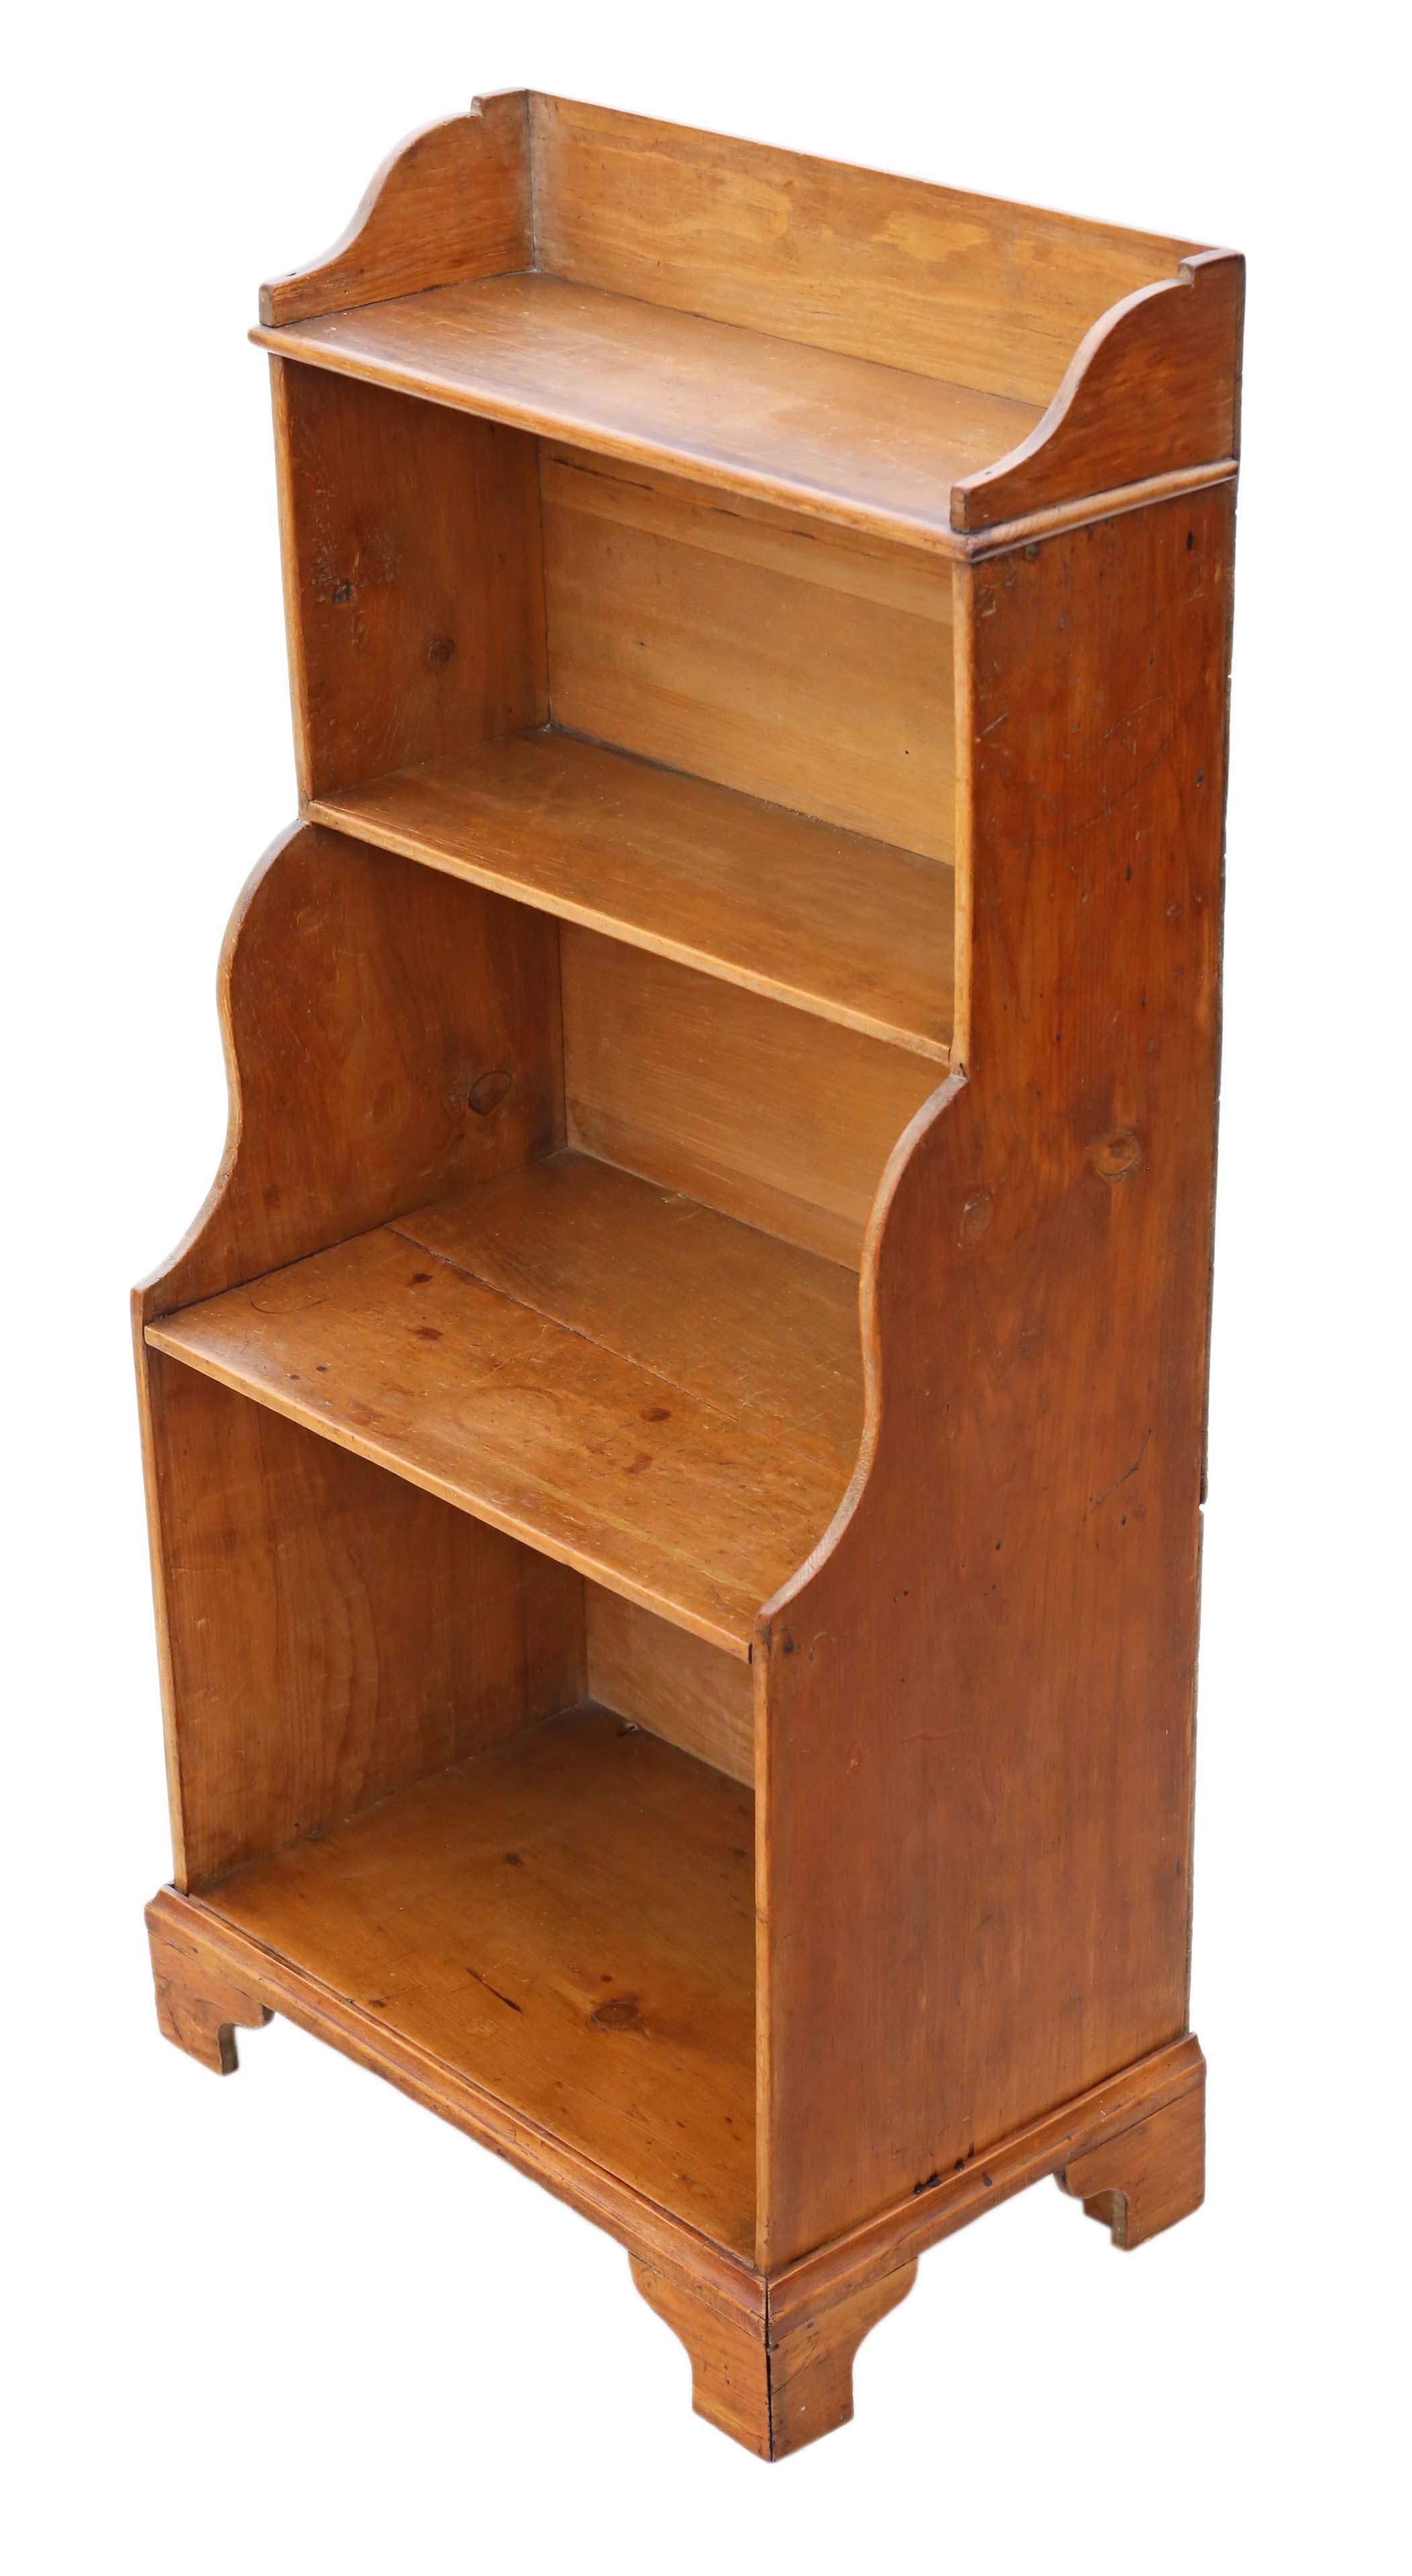 Antique 19th century Victorian pine waterfall bookcase or shelves.
Solid and strong, with no loose joints. No woodworm.
Would look great in the right location!
Overall maximum dimensions: 49cm W x 31cm D x 100cm H.
Bottom shelf 43cm W x 28cm D x